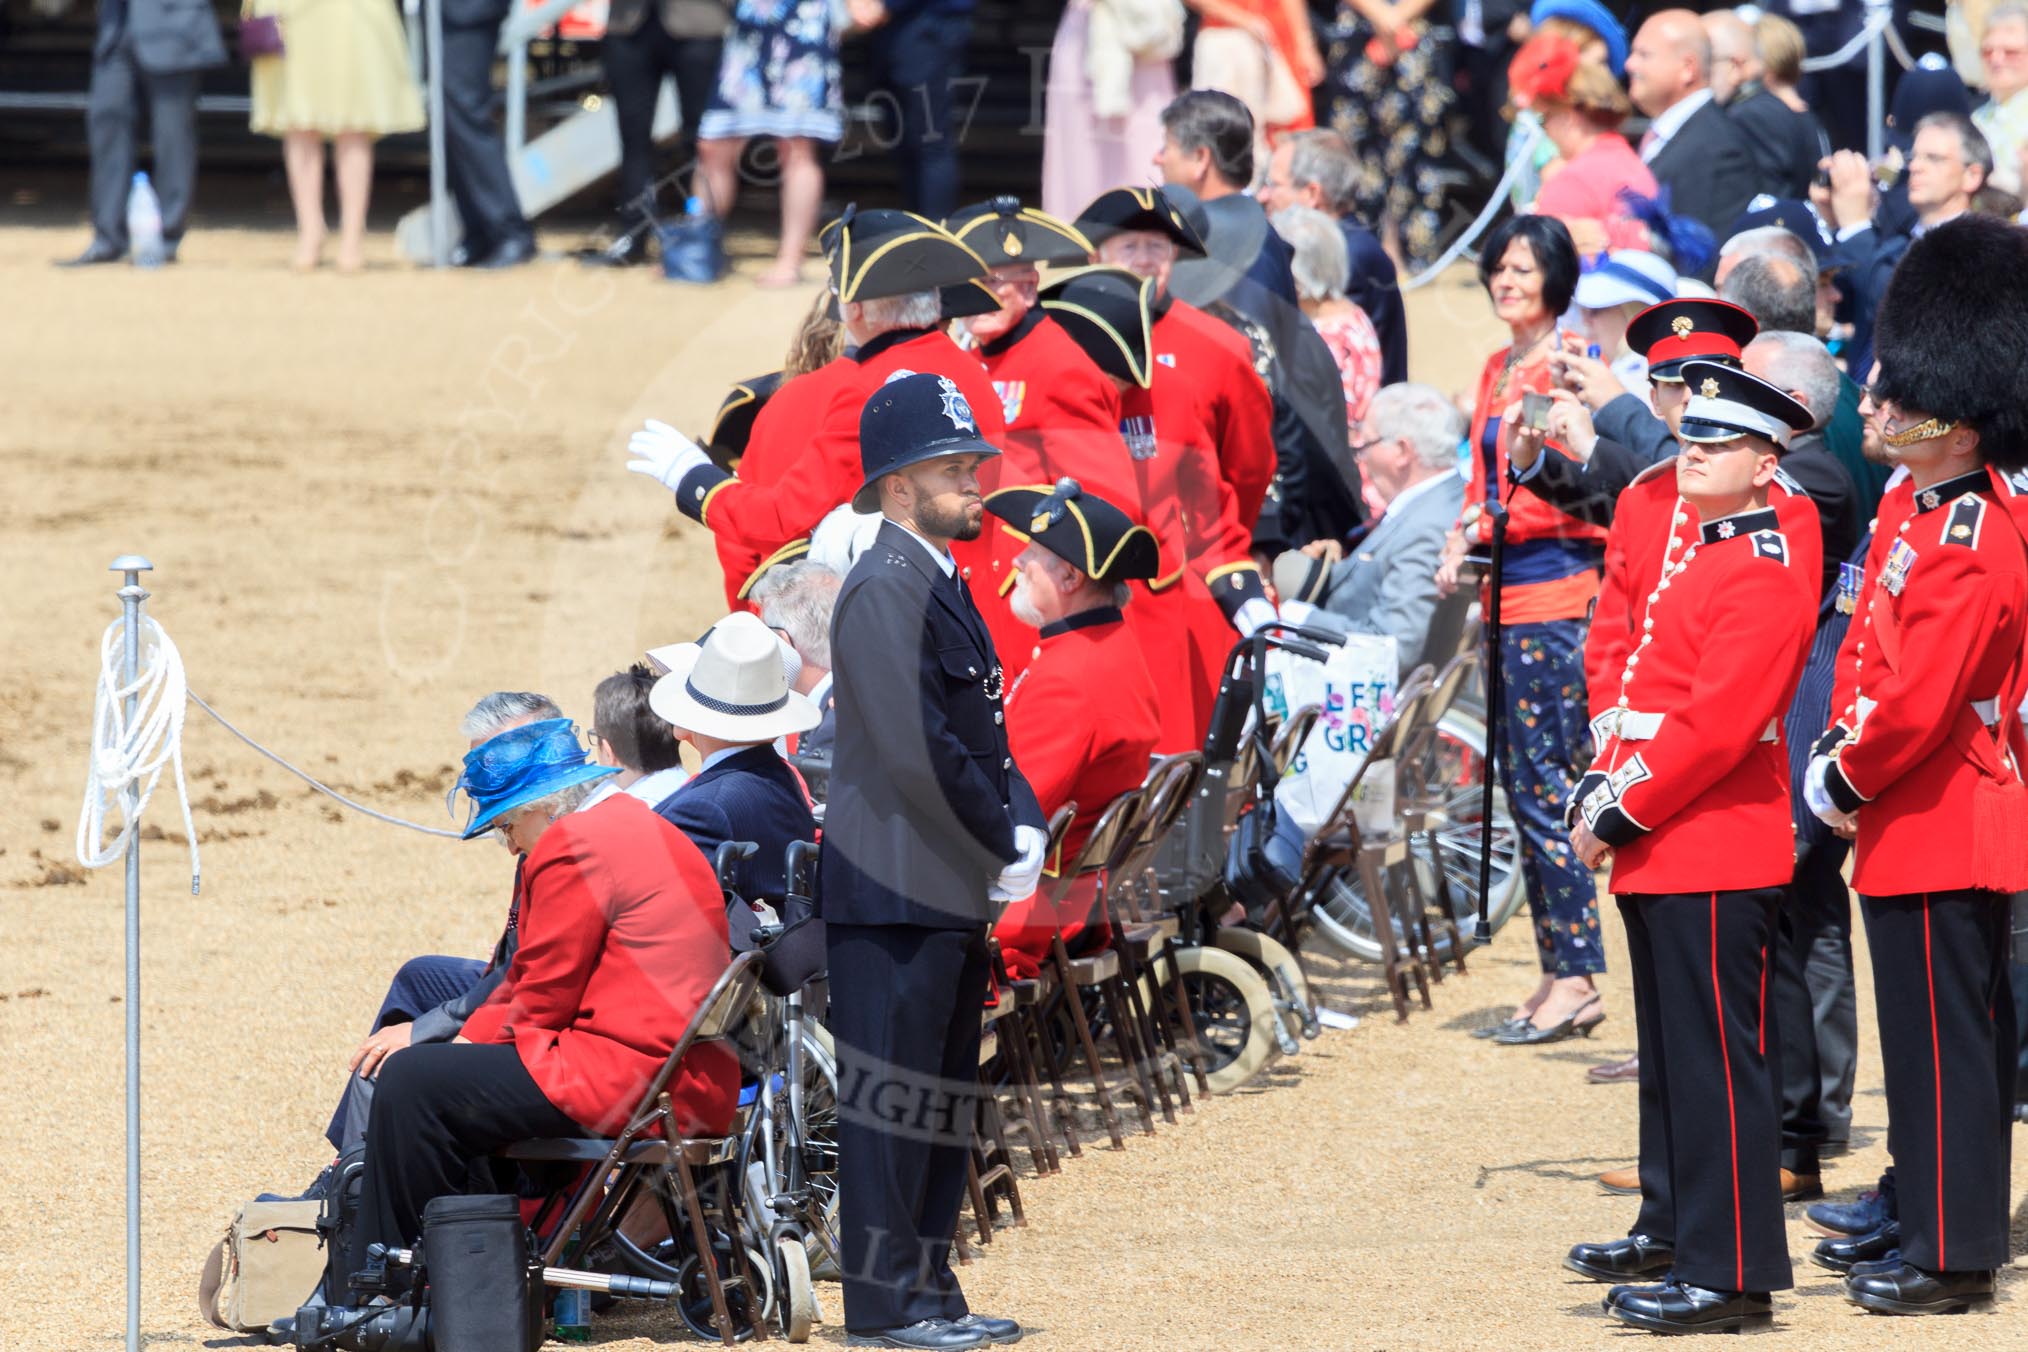 during Trooping the Colour {iptcyear4}, The Queen's Birthday Parade at Horse Guards Parade, Westminster, London, 9 June 2018, 12:18.